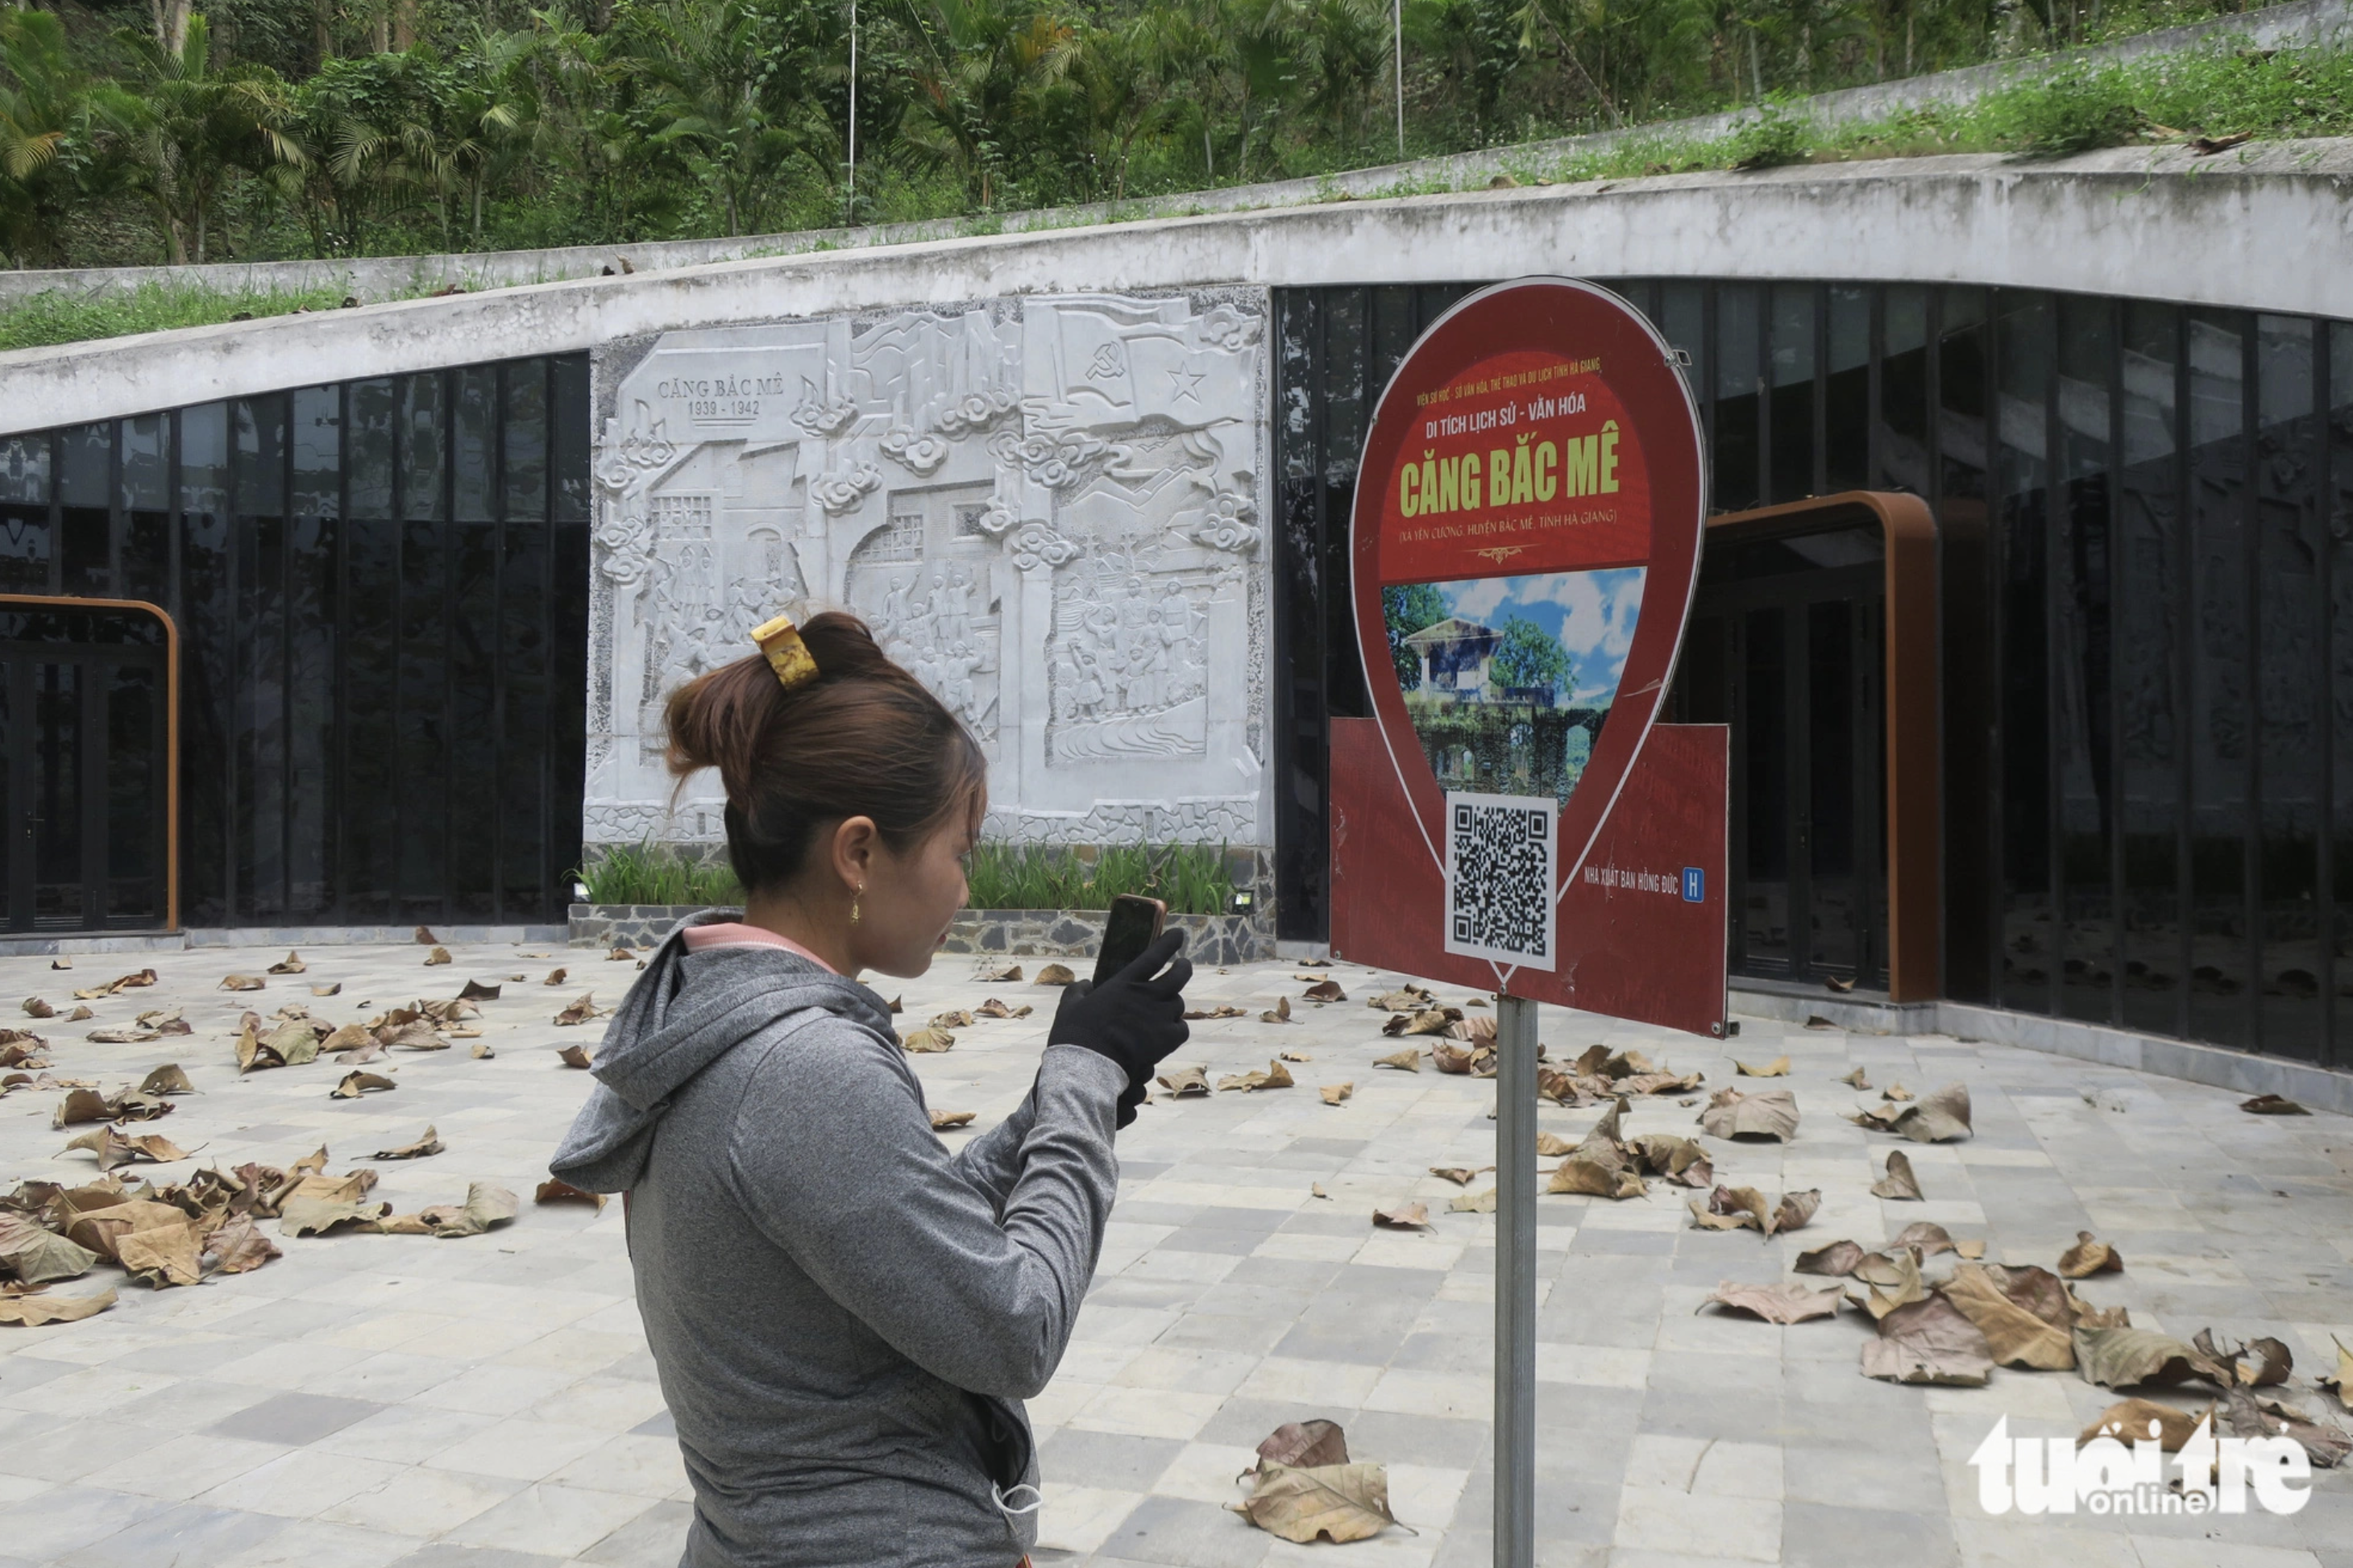 A visitor scans a QR code to learn about the Cang Bac Me military base on Rong (Dragon) Mountain in Yen Cuong Commune under Bac Me District, Ha Giang Province. Photo: T.T.D. / Tuoi Tre